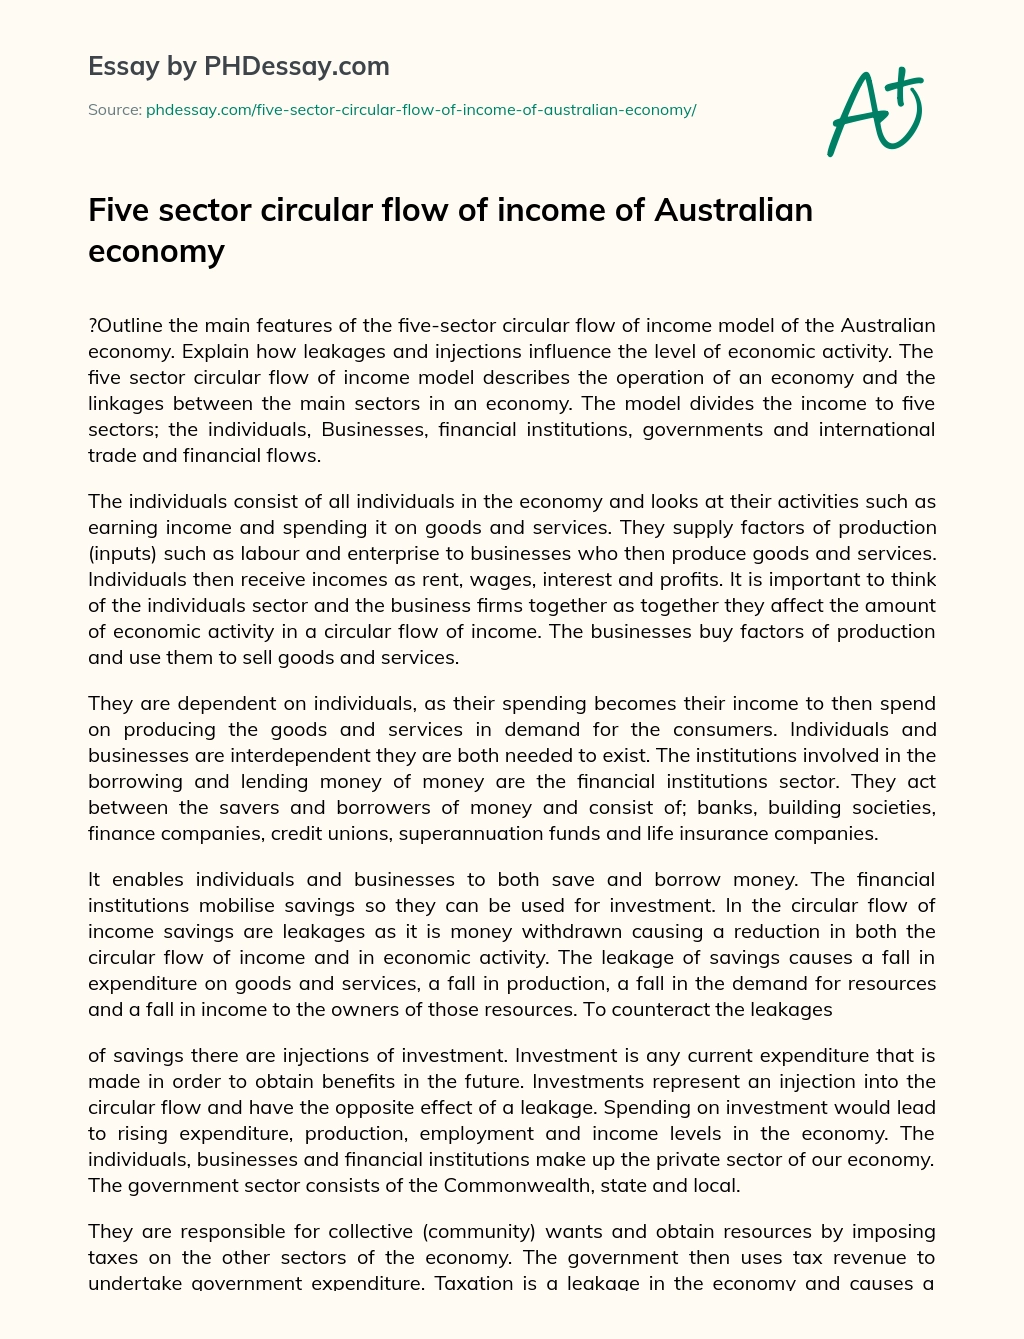 Five Sector Circular Flow of Income of Australian Economy essay